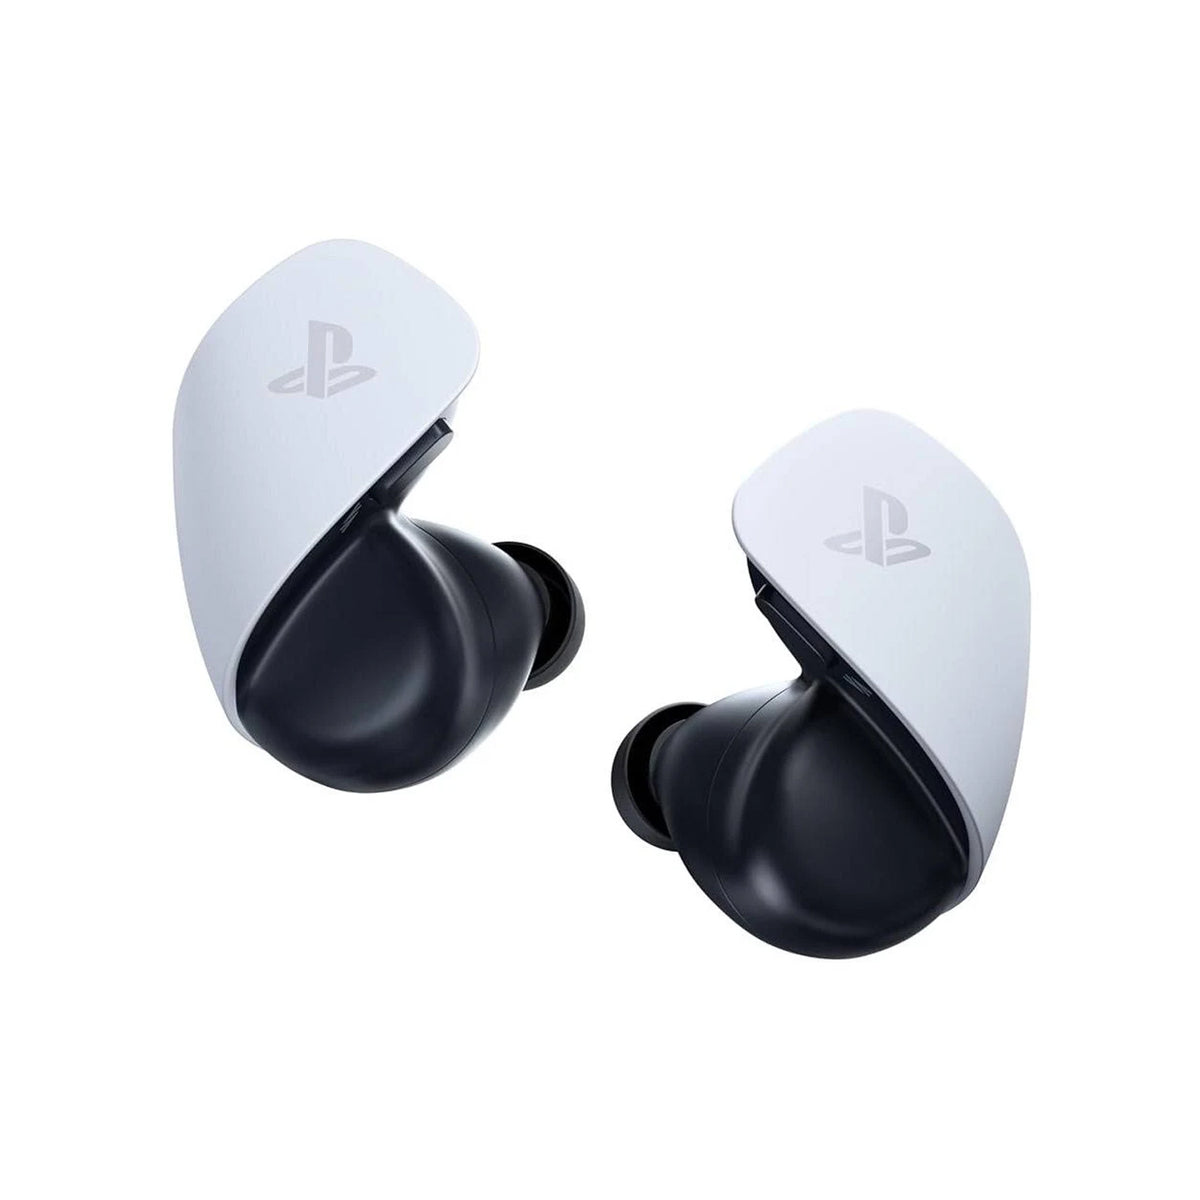 Sony PlayStation Pulse Explore Wireless Earbuds